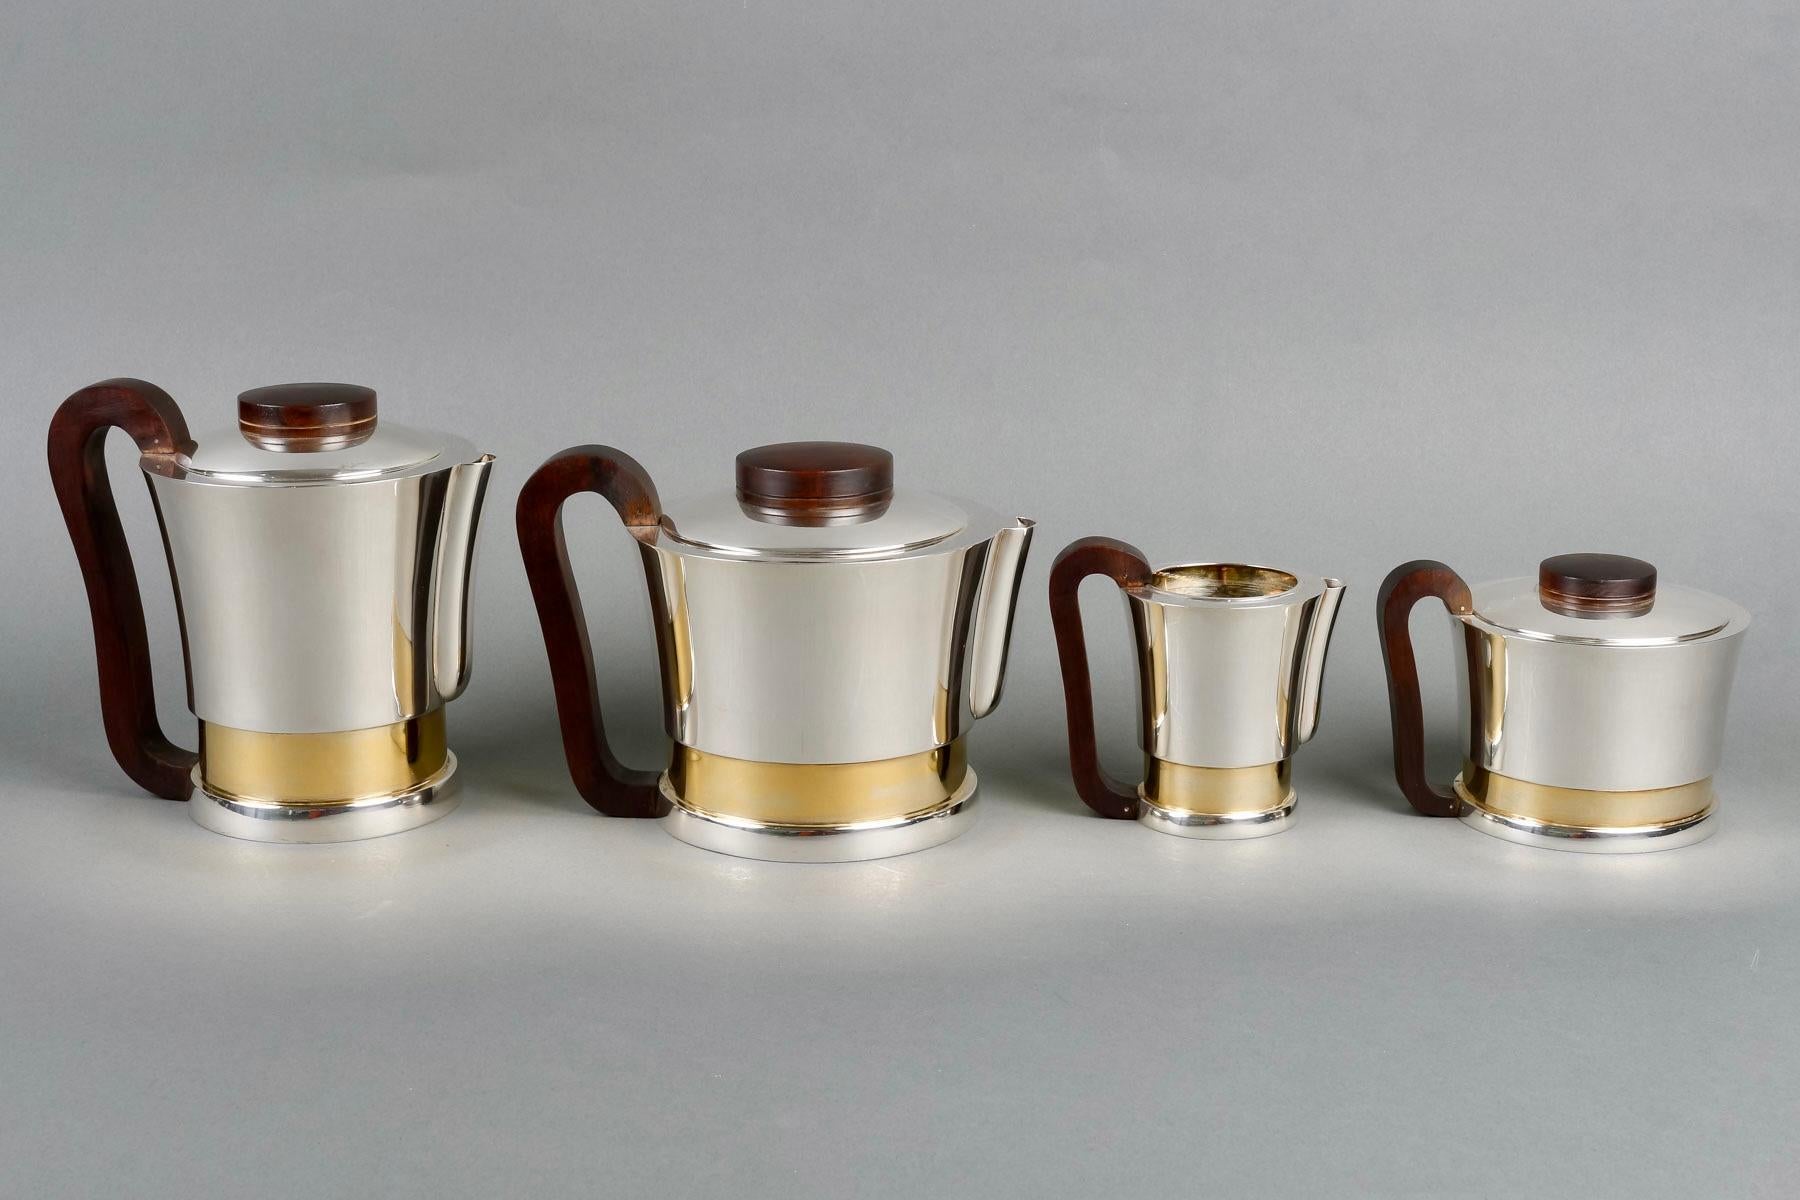 Art Deco Modernist tea and coffee set in sterling pure silver, vermeil and rosewood by Jean E. Puiforcat created in the 1930s.

Service including:
- a coffee pot 
- a teapot
- a milkpot
- a sugar pot

Minerve Solid Silver 950/1000 French mark -